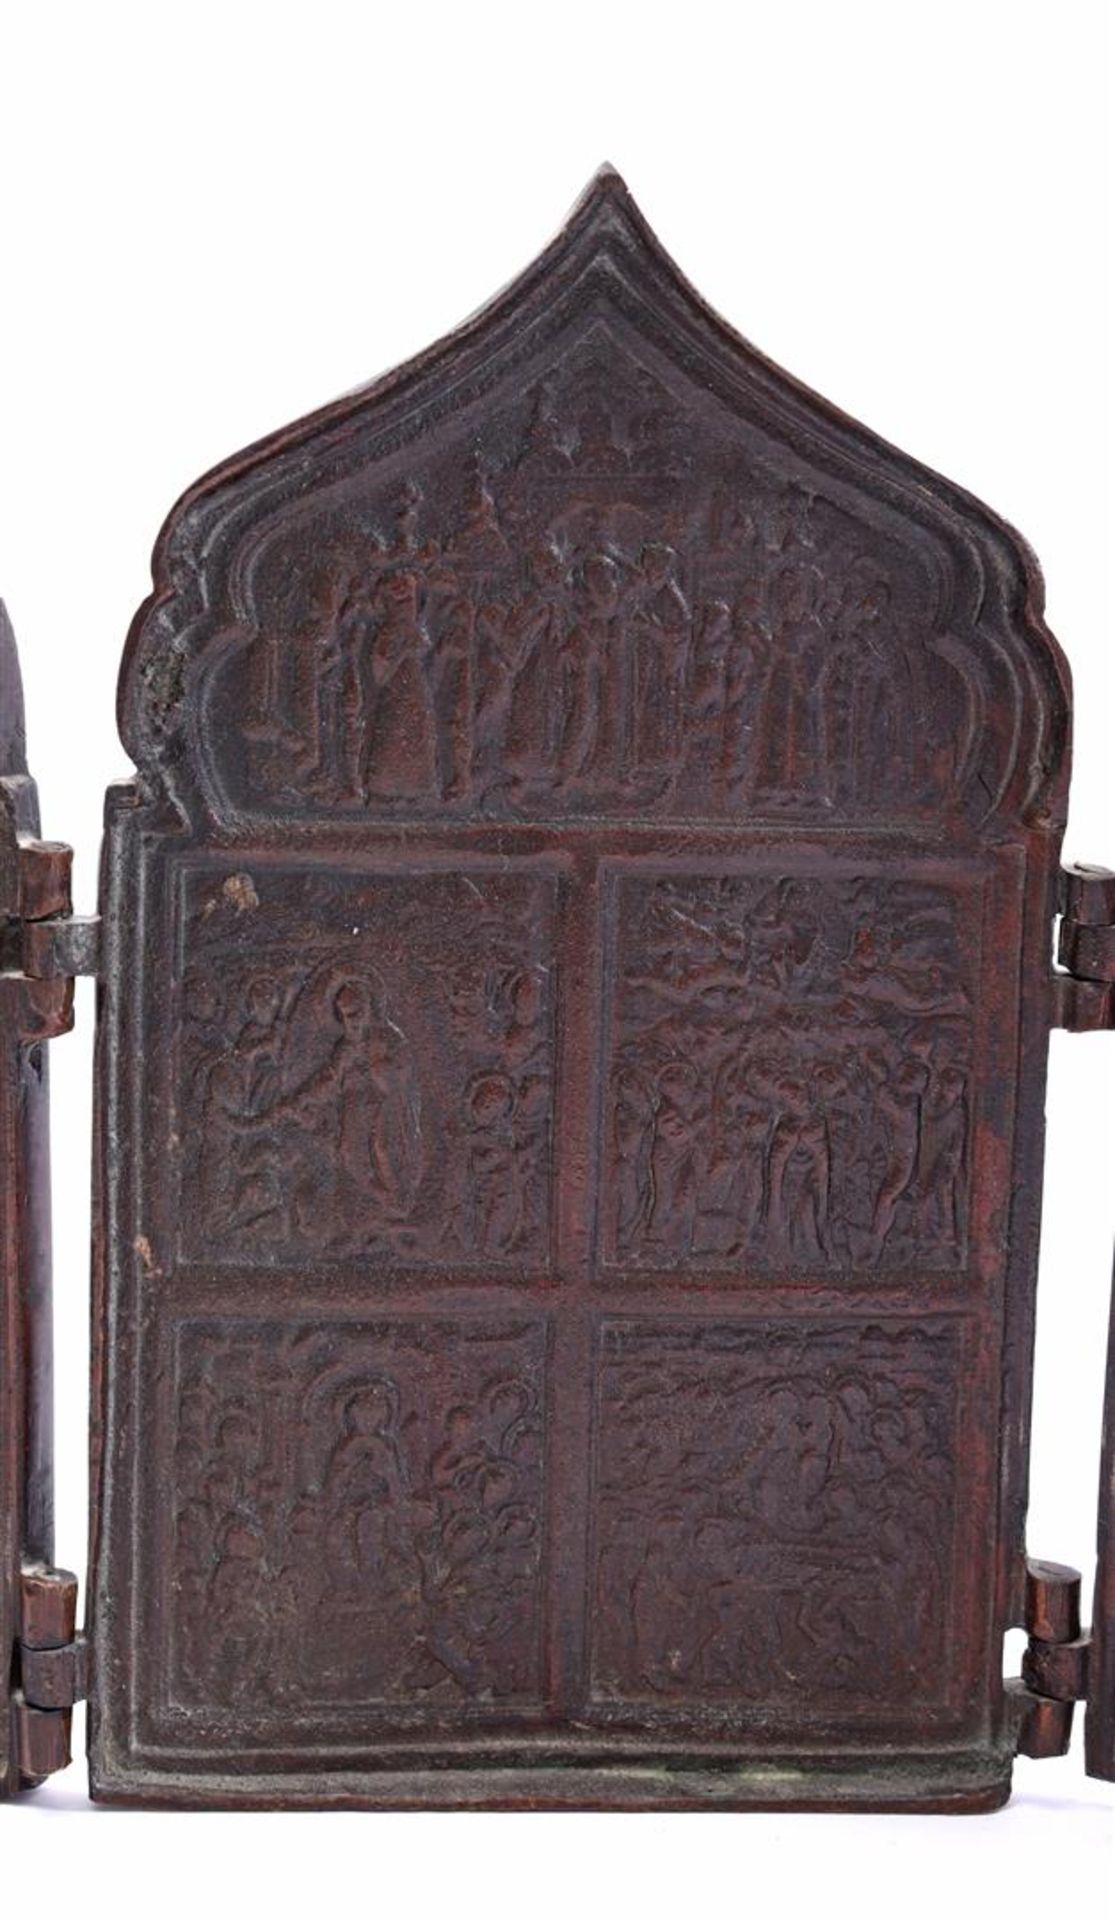 Bronze four-panel icon with various religious scenes, Russia - Image 4 of 7